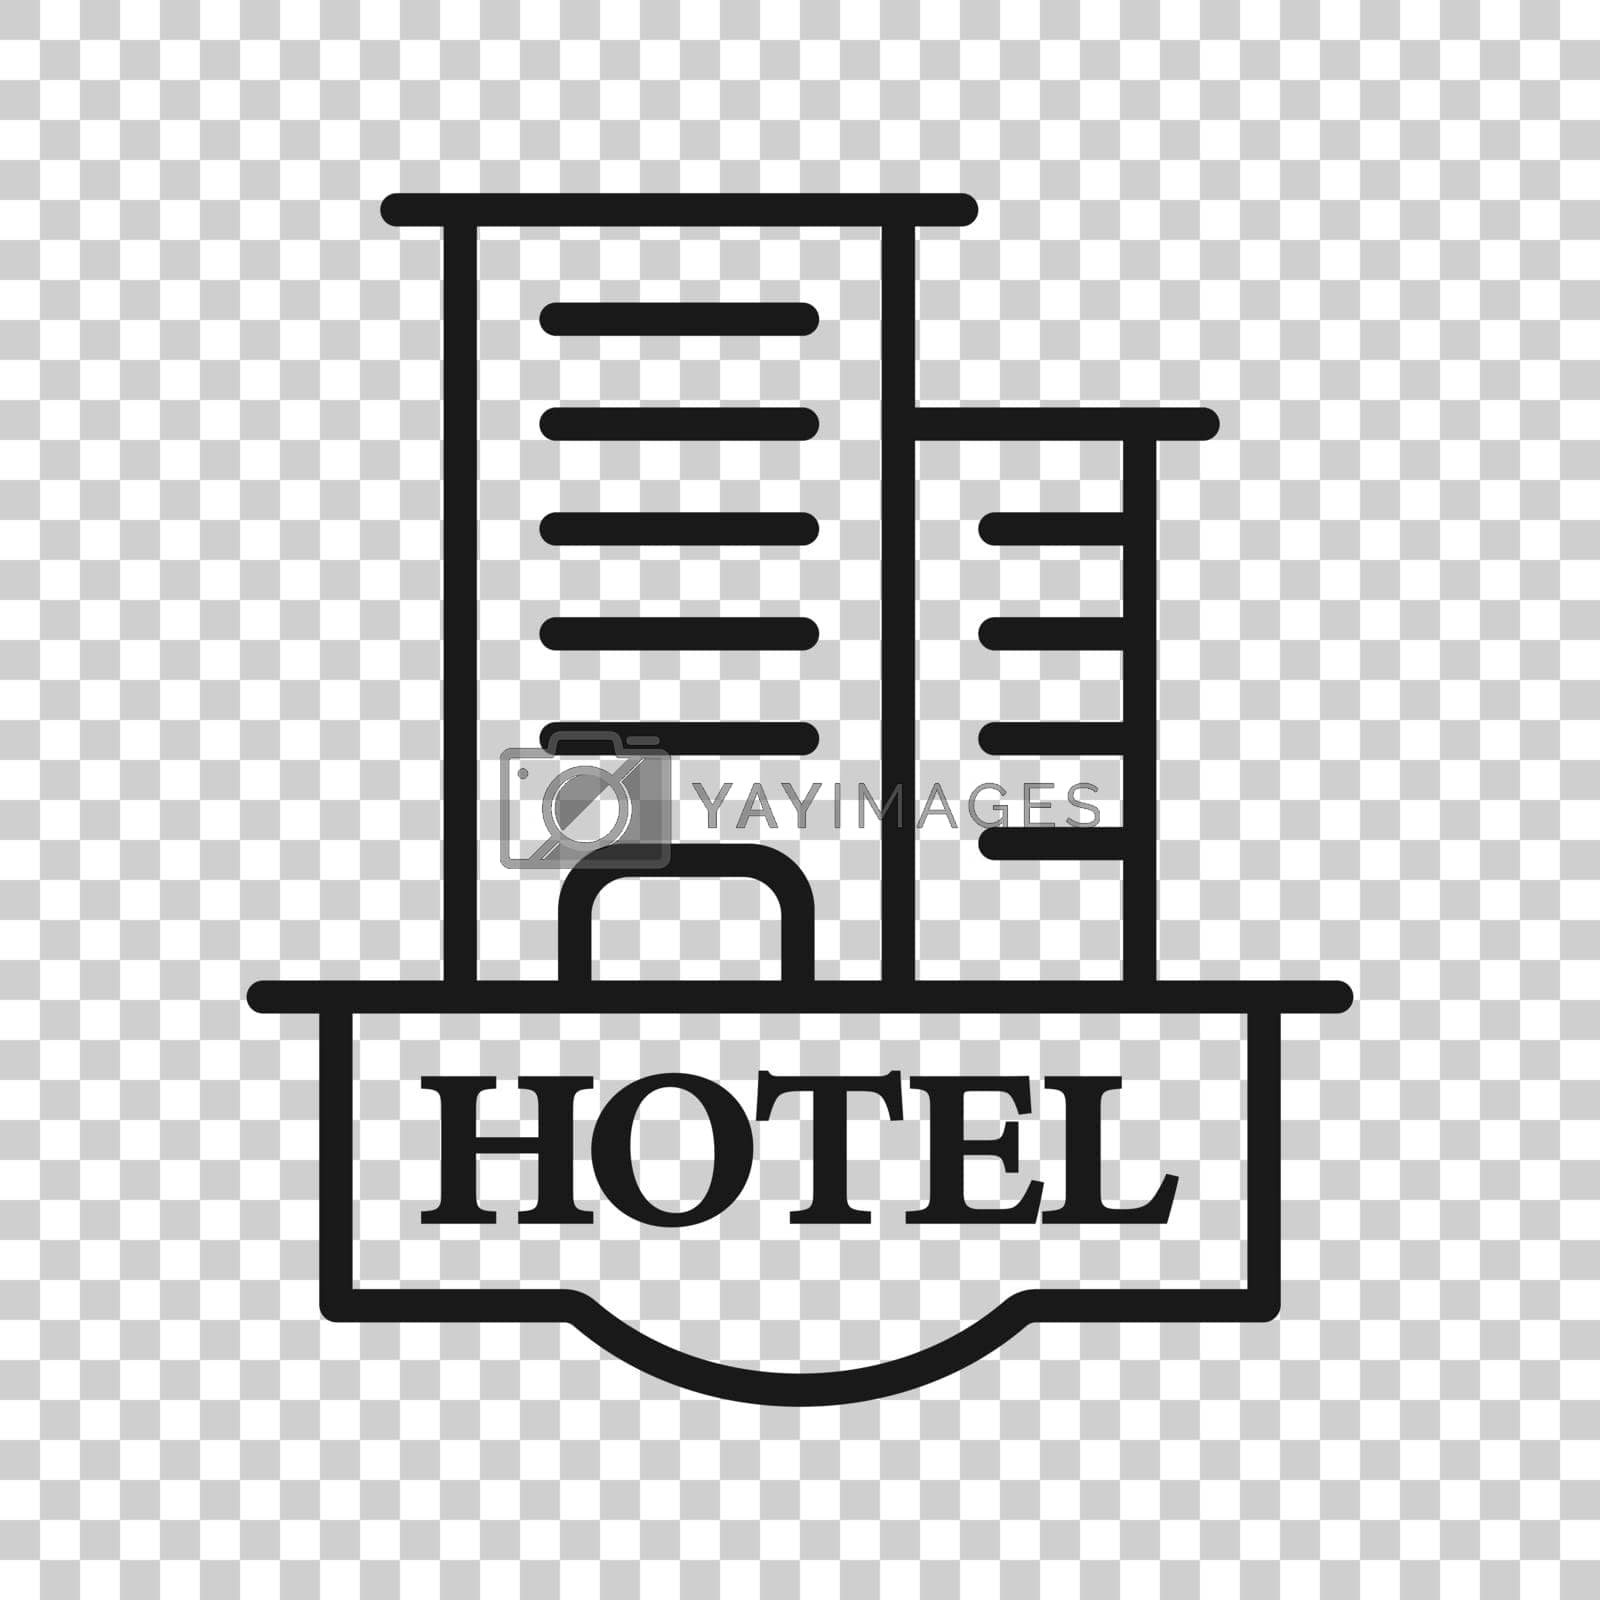 Royalty free image of Hotel sign icon in flat style. Inn building vector illustration on white isolated background. Hostel room business concept. by LysenkoA